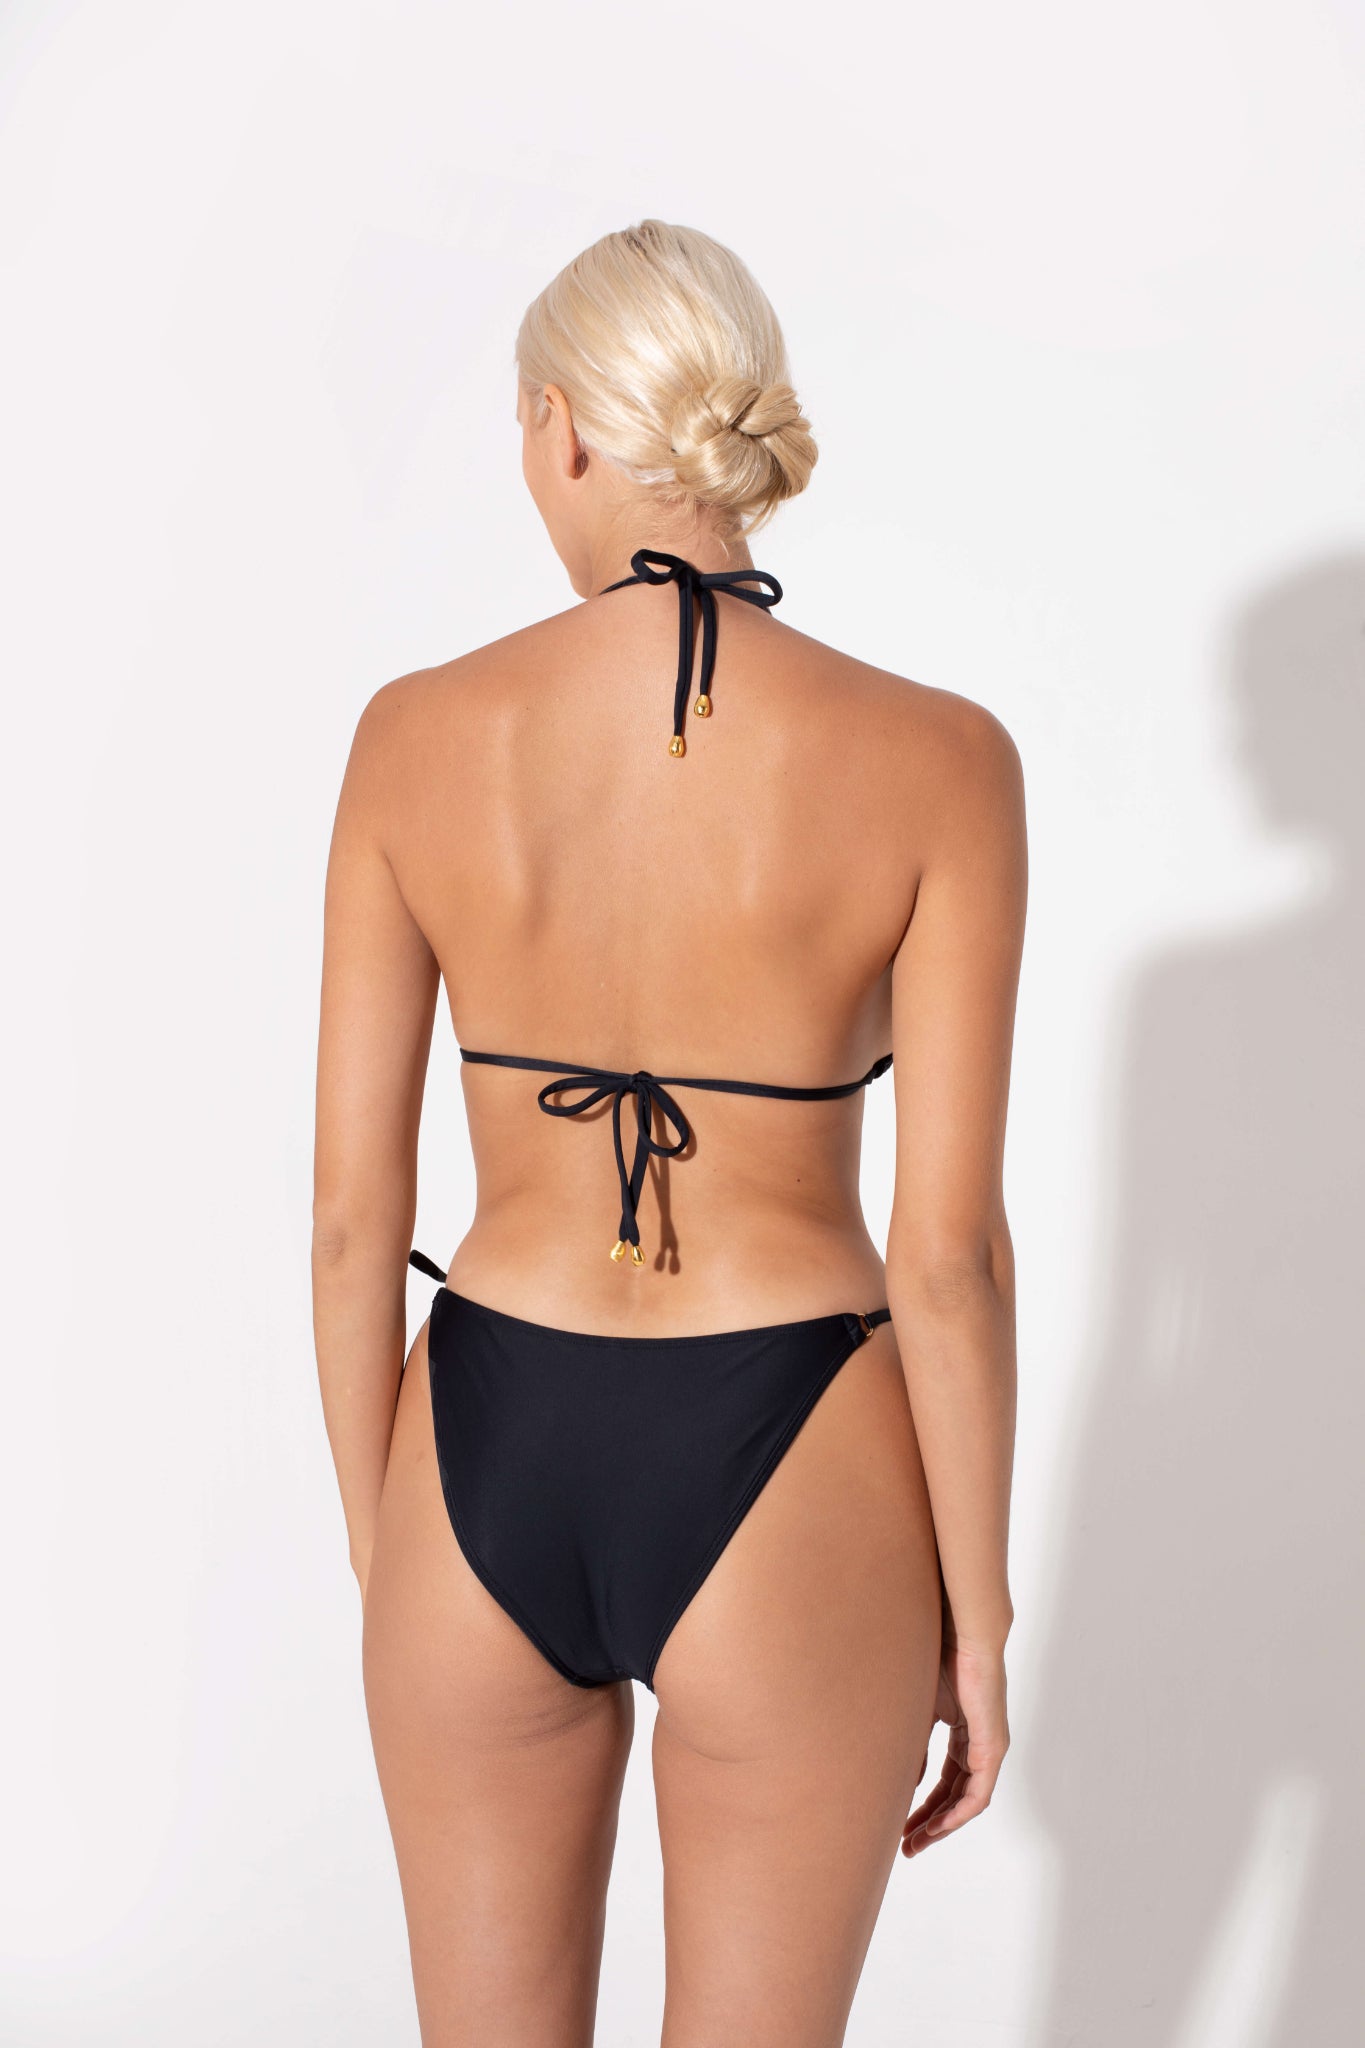 high quality fabrics and timeless colors, koraru bikinis are must haves this summer